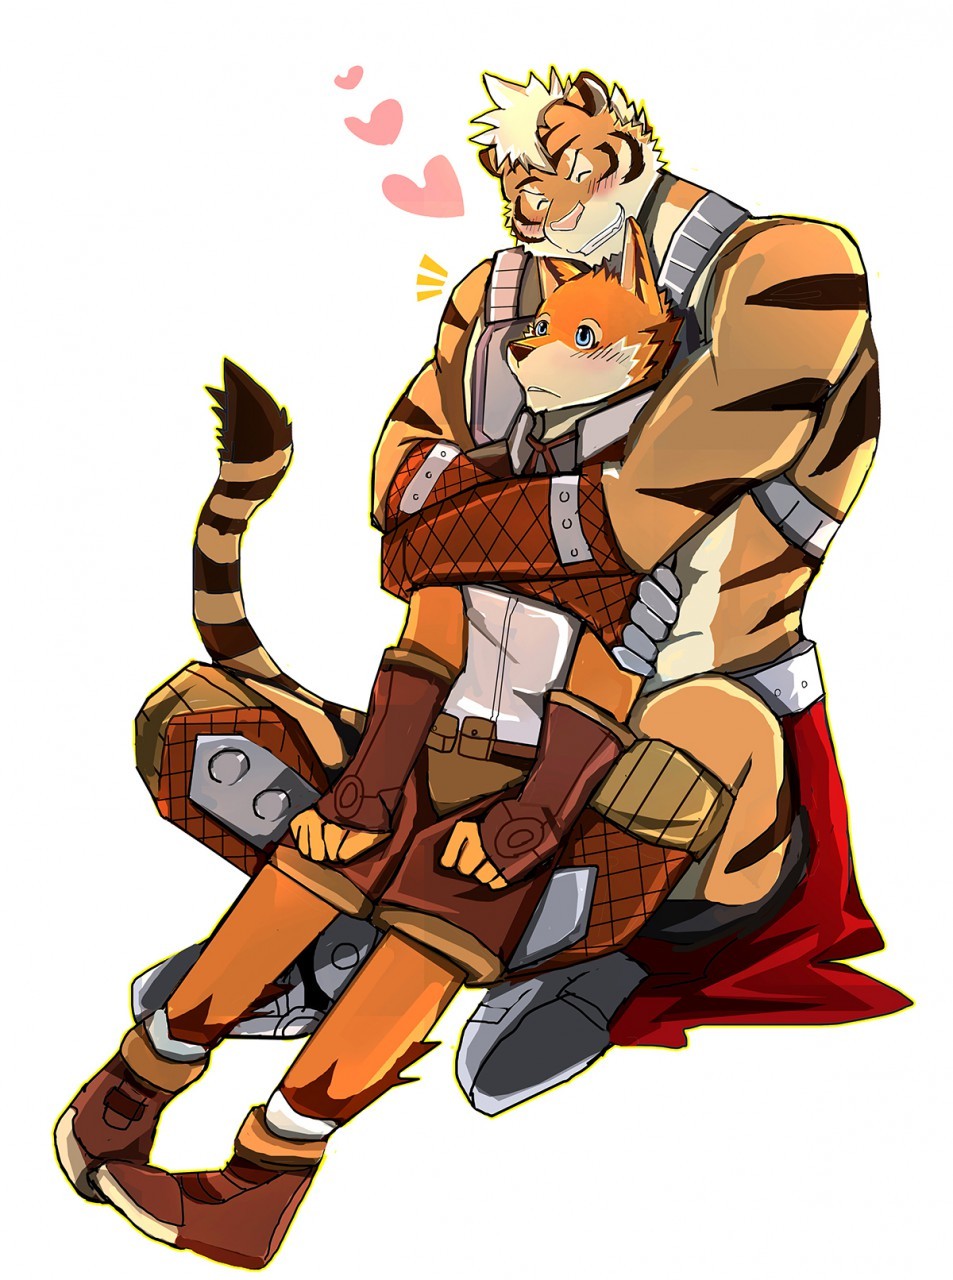 johnny-and-stuff-deactivated201:  Tiger Hug❤ - by bearlovestiger13 